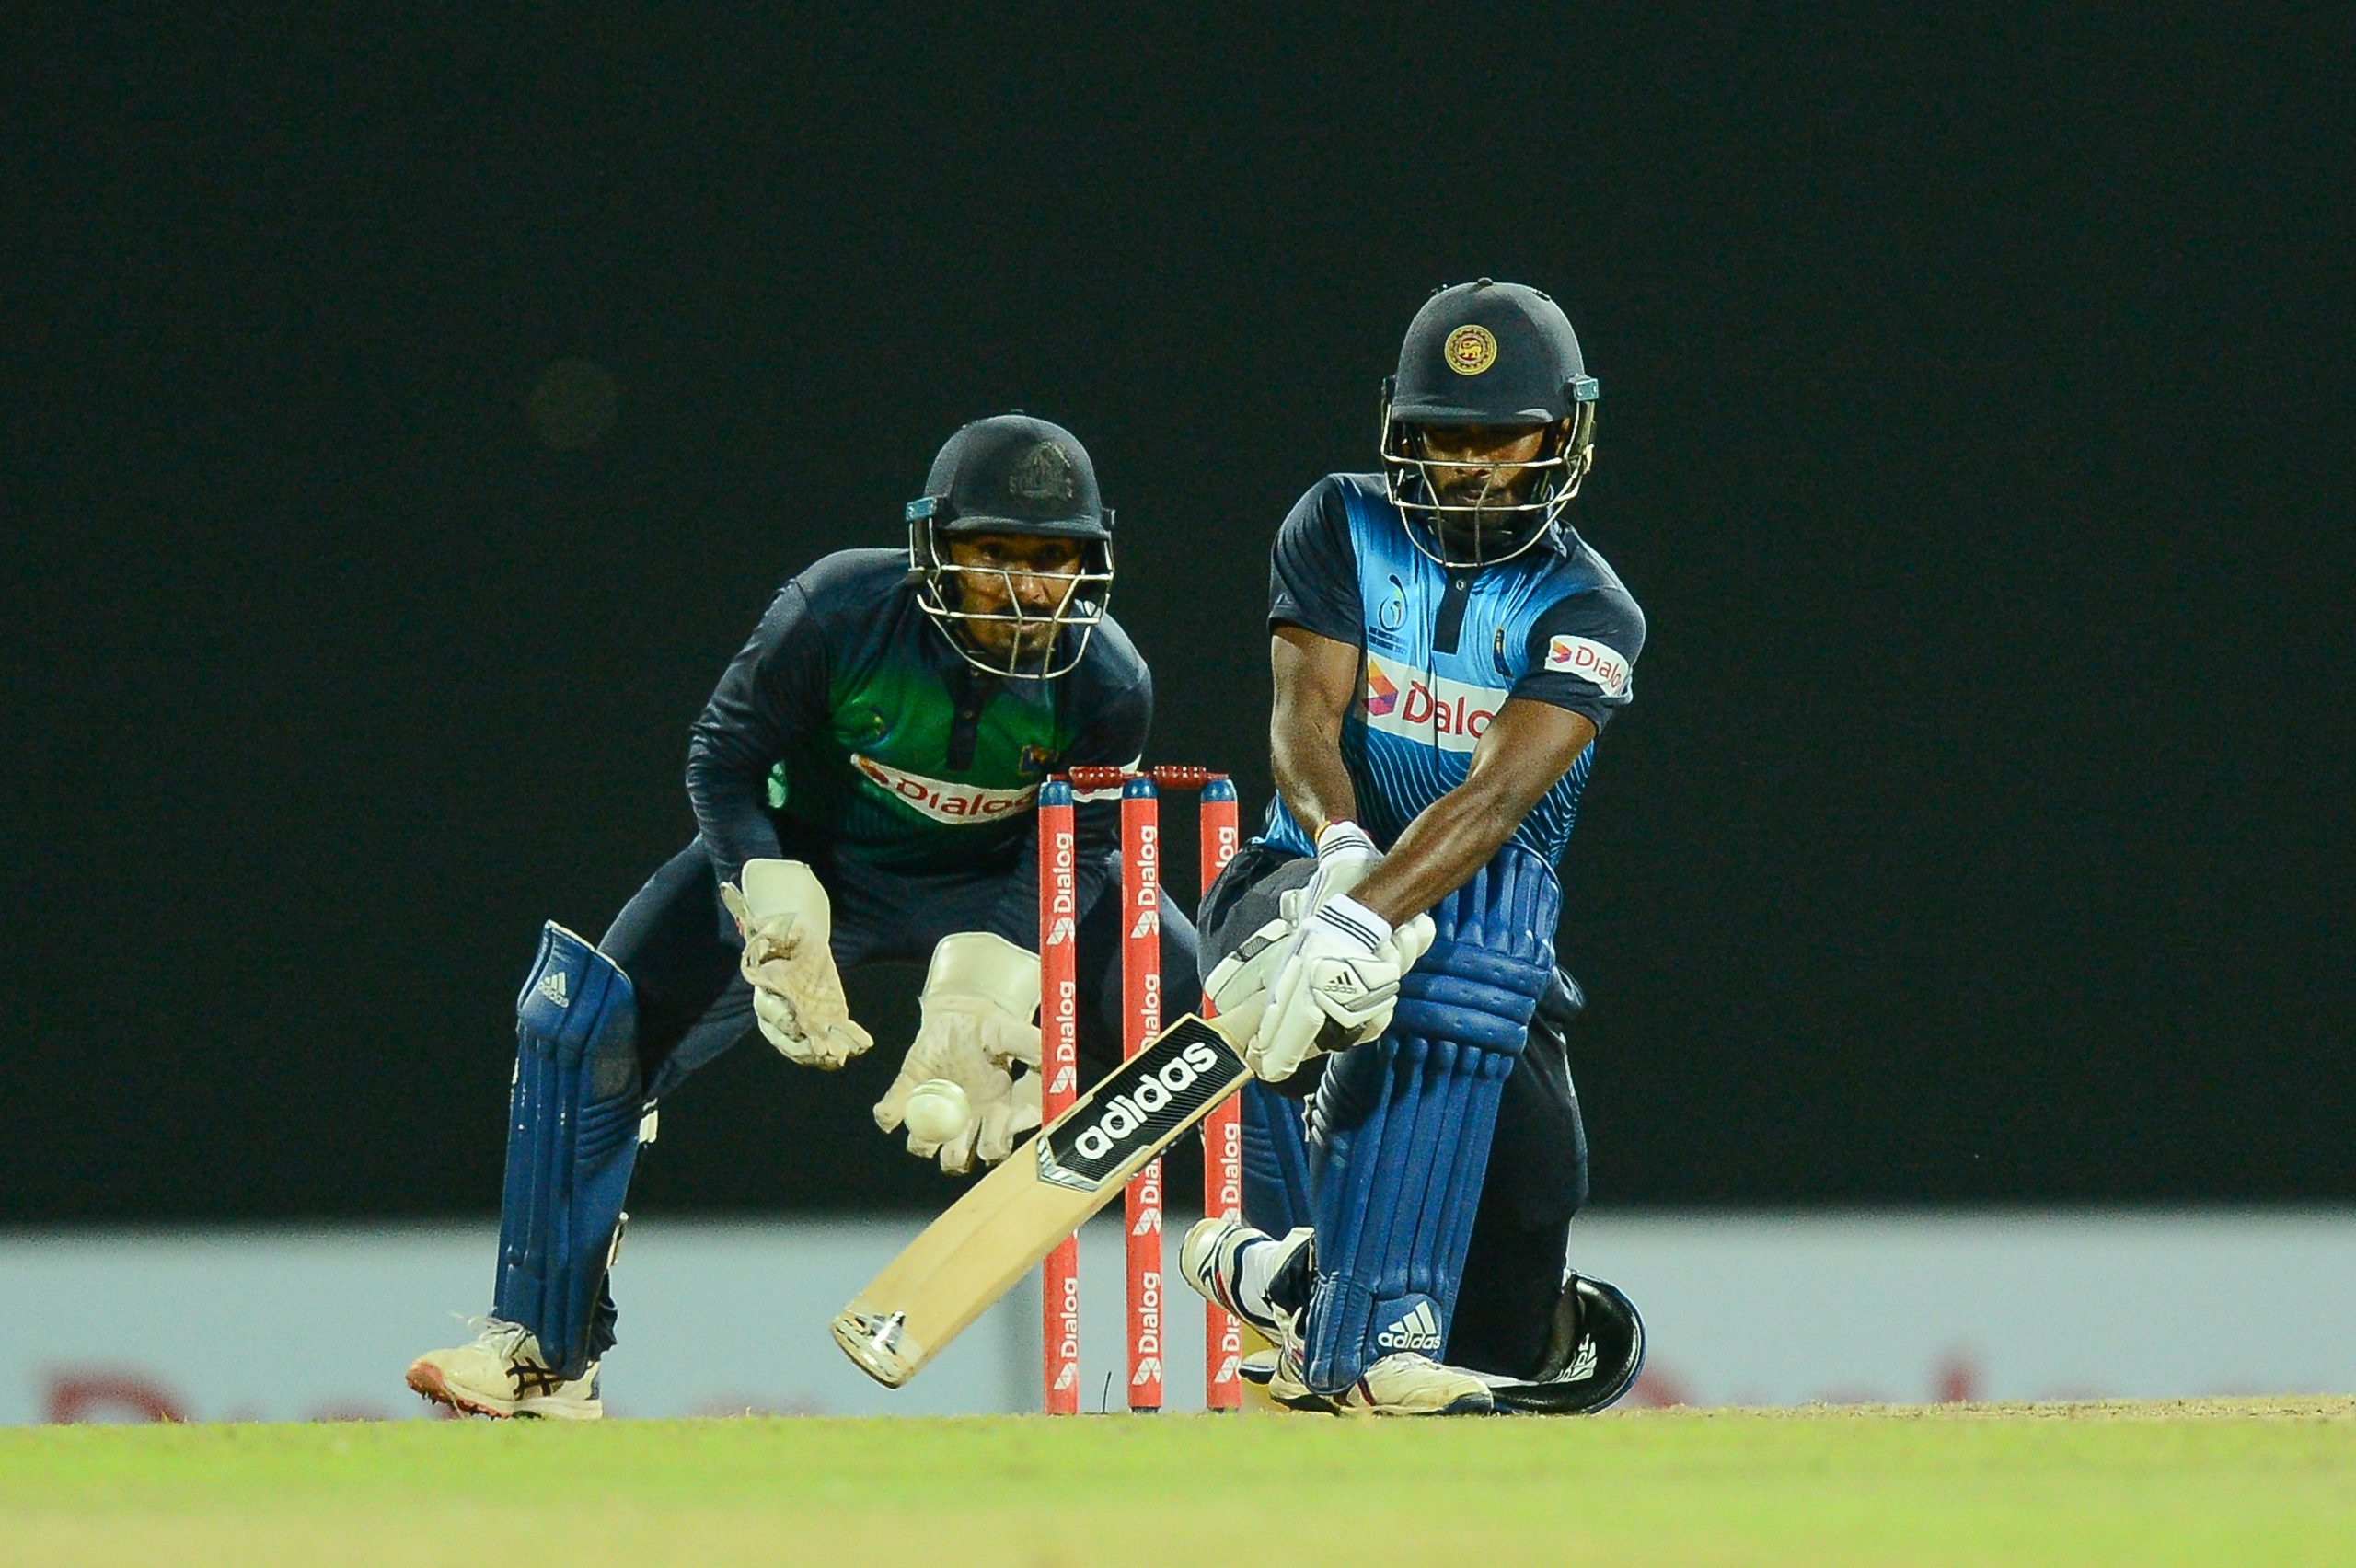 Greys beat Reds by 35 | Blues win by 5 wickets over Greens in thriller